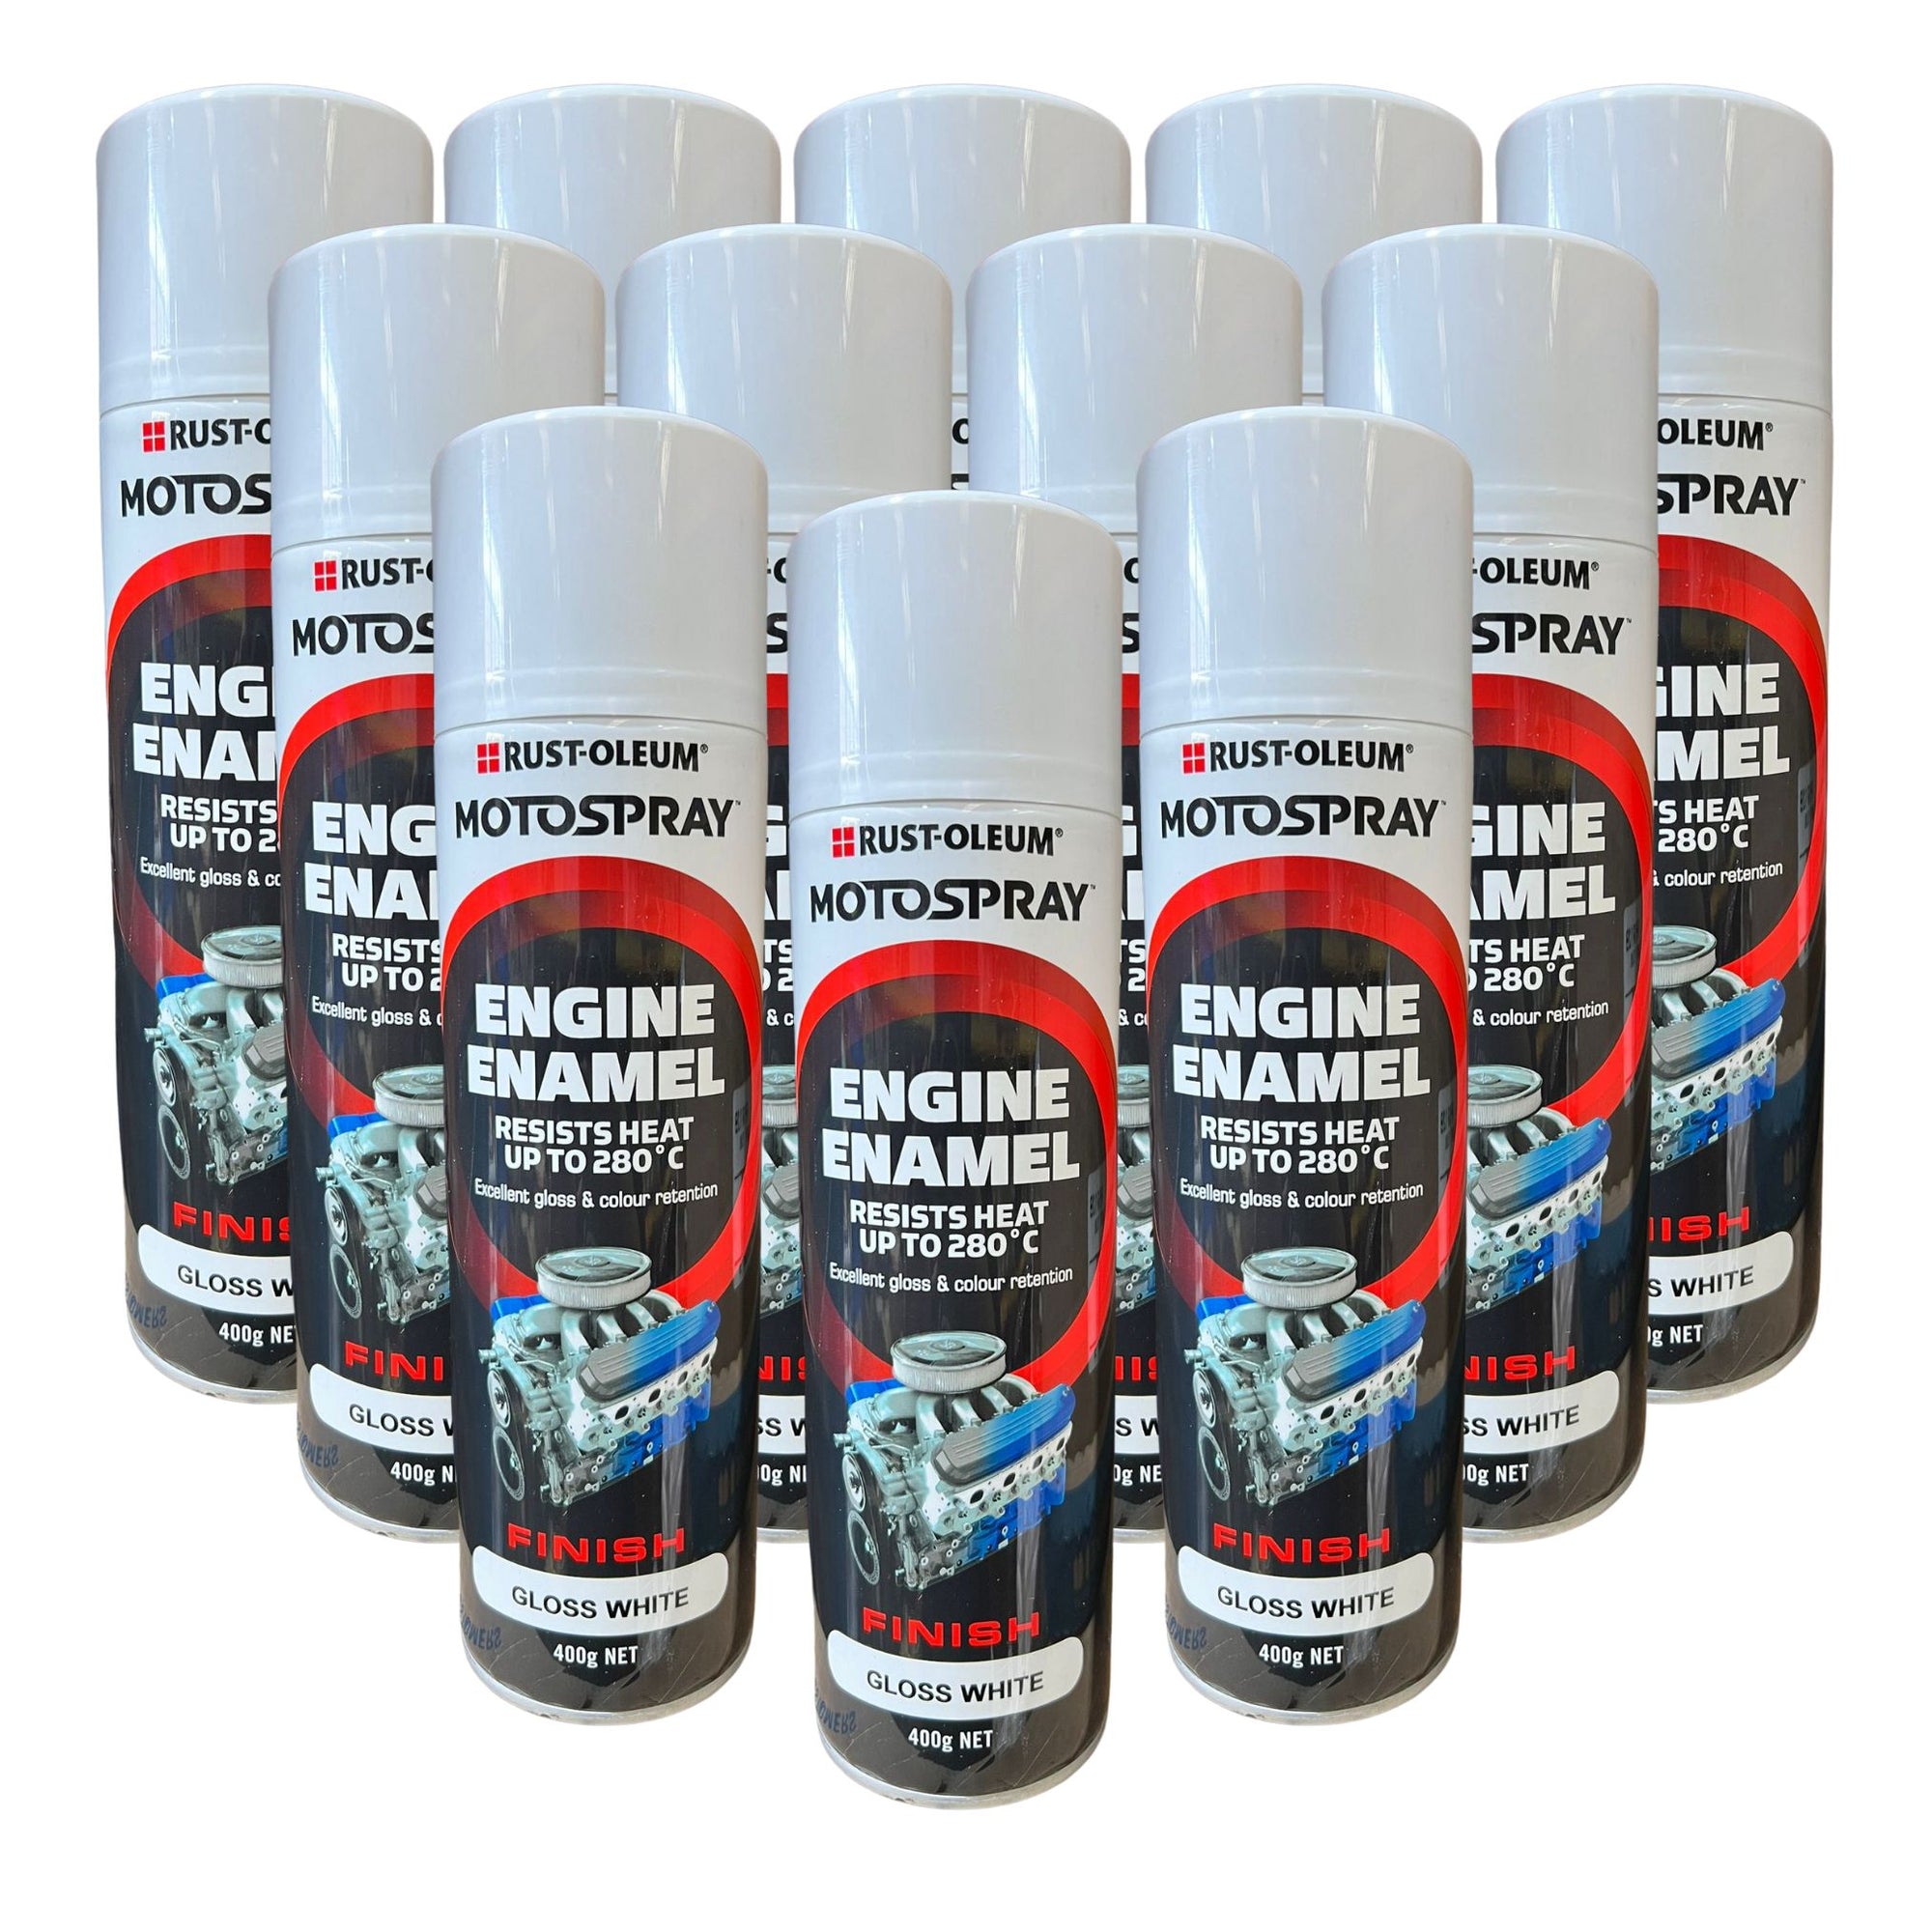 Rust-Oleum Motospray Engine Enamel heat resistant Spray Paint - 12 Cans - Gloss White - South East Clearance Centre